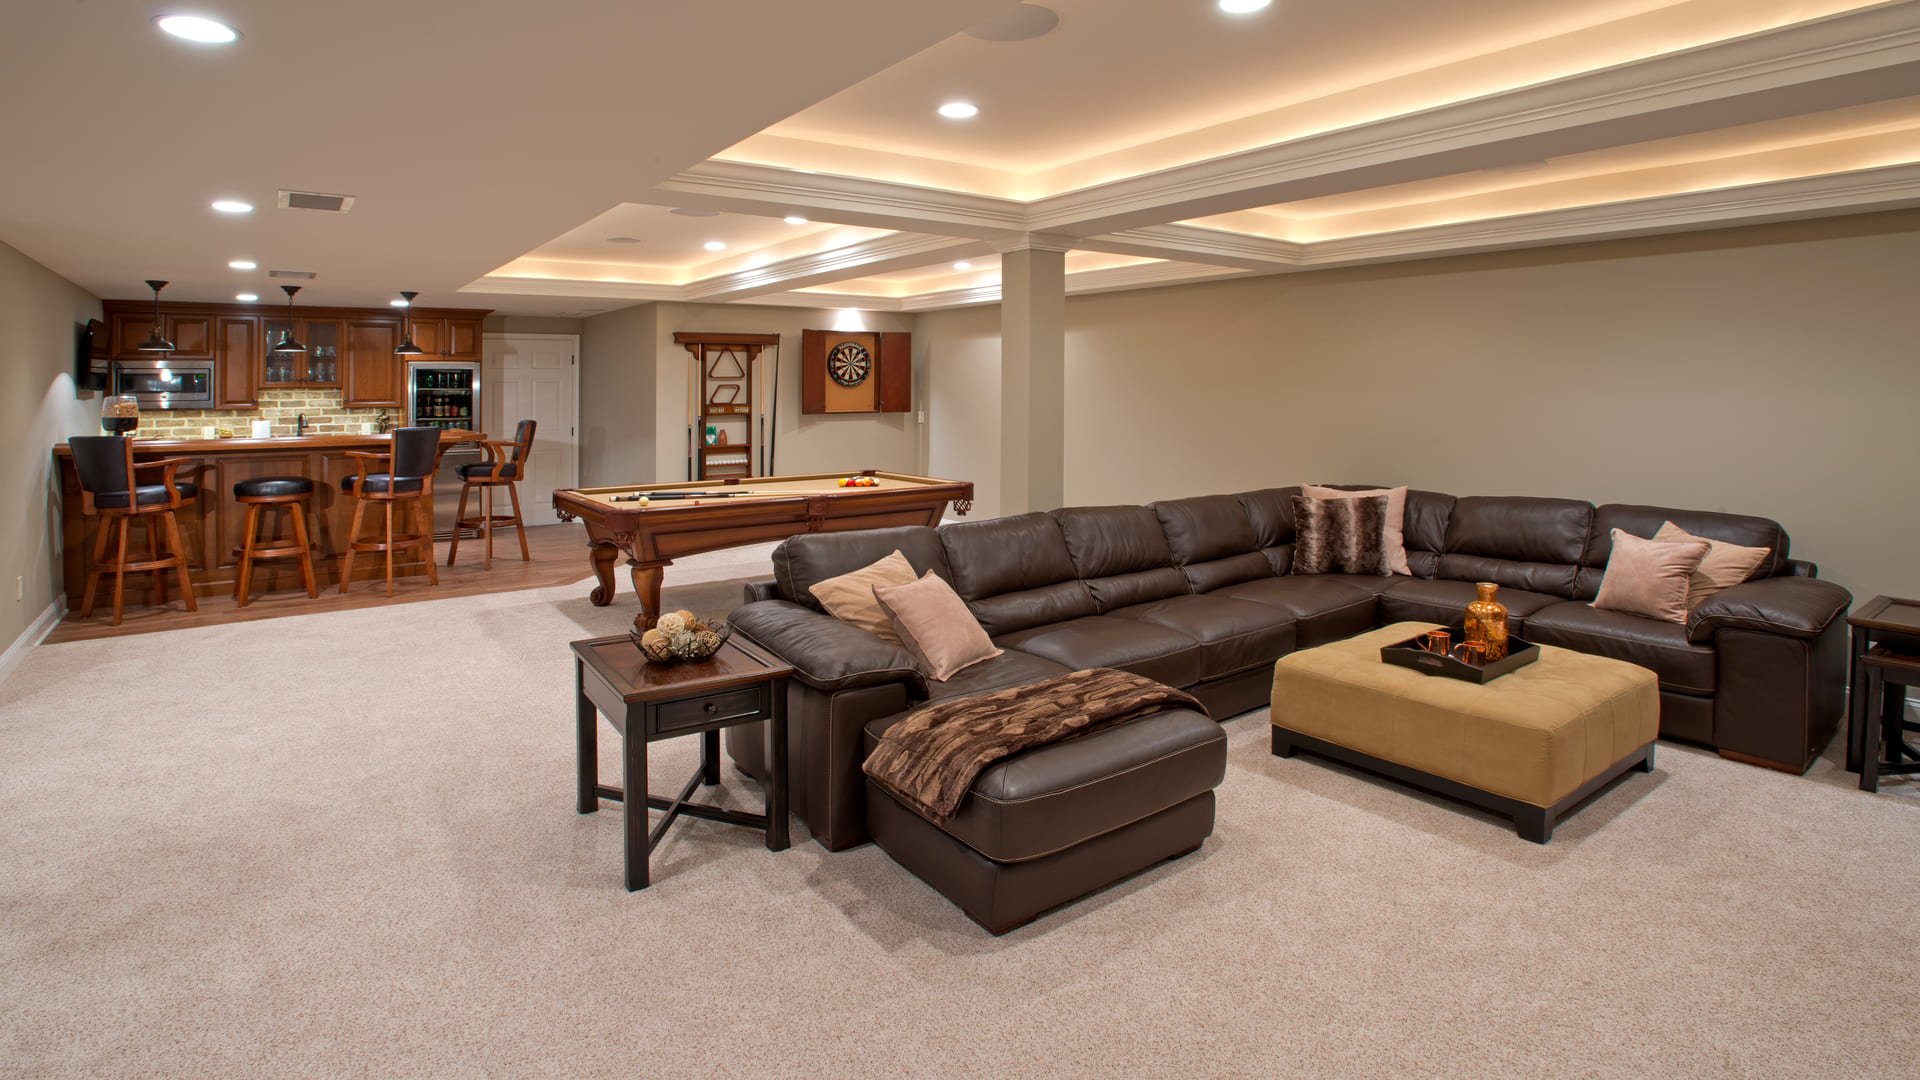 Luxury basement remodel with pool table and couch in the lehigh valley, pa by Penn Contractors 